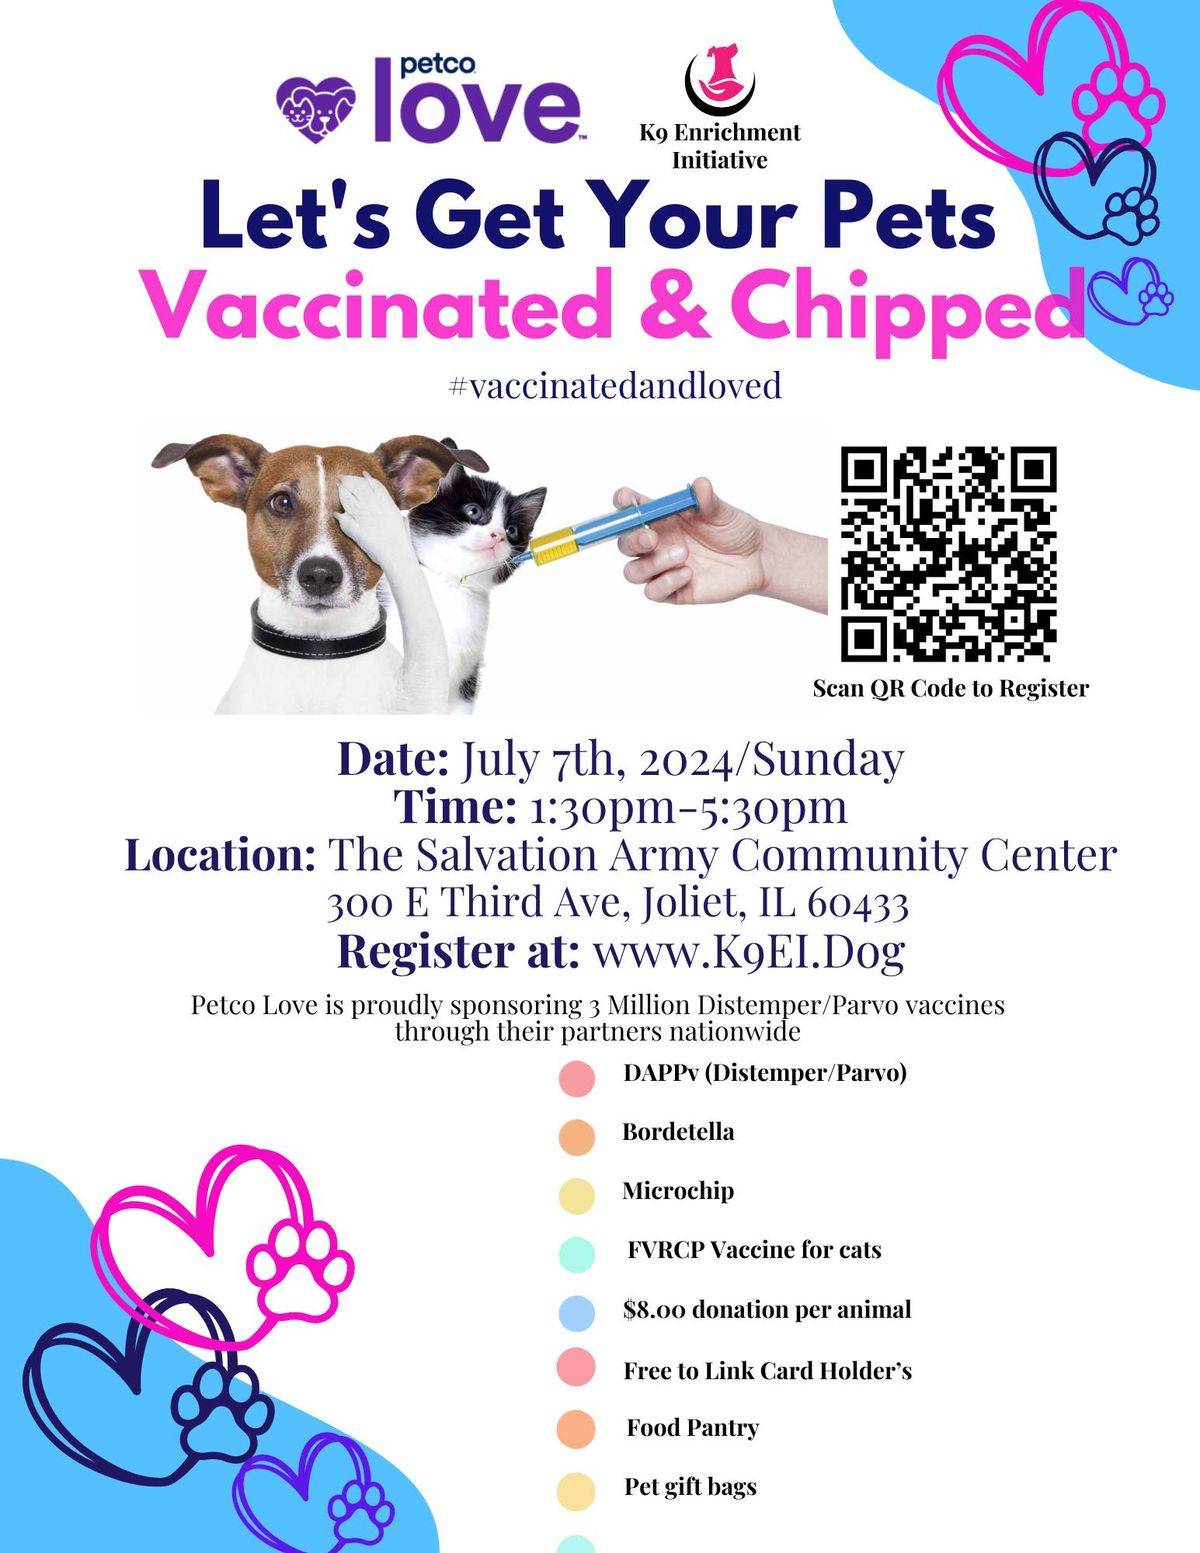 Vaccination and Microchip Clinic